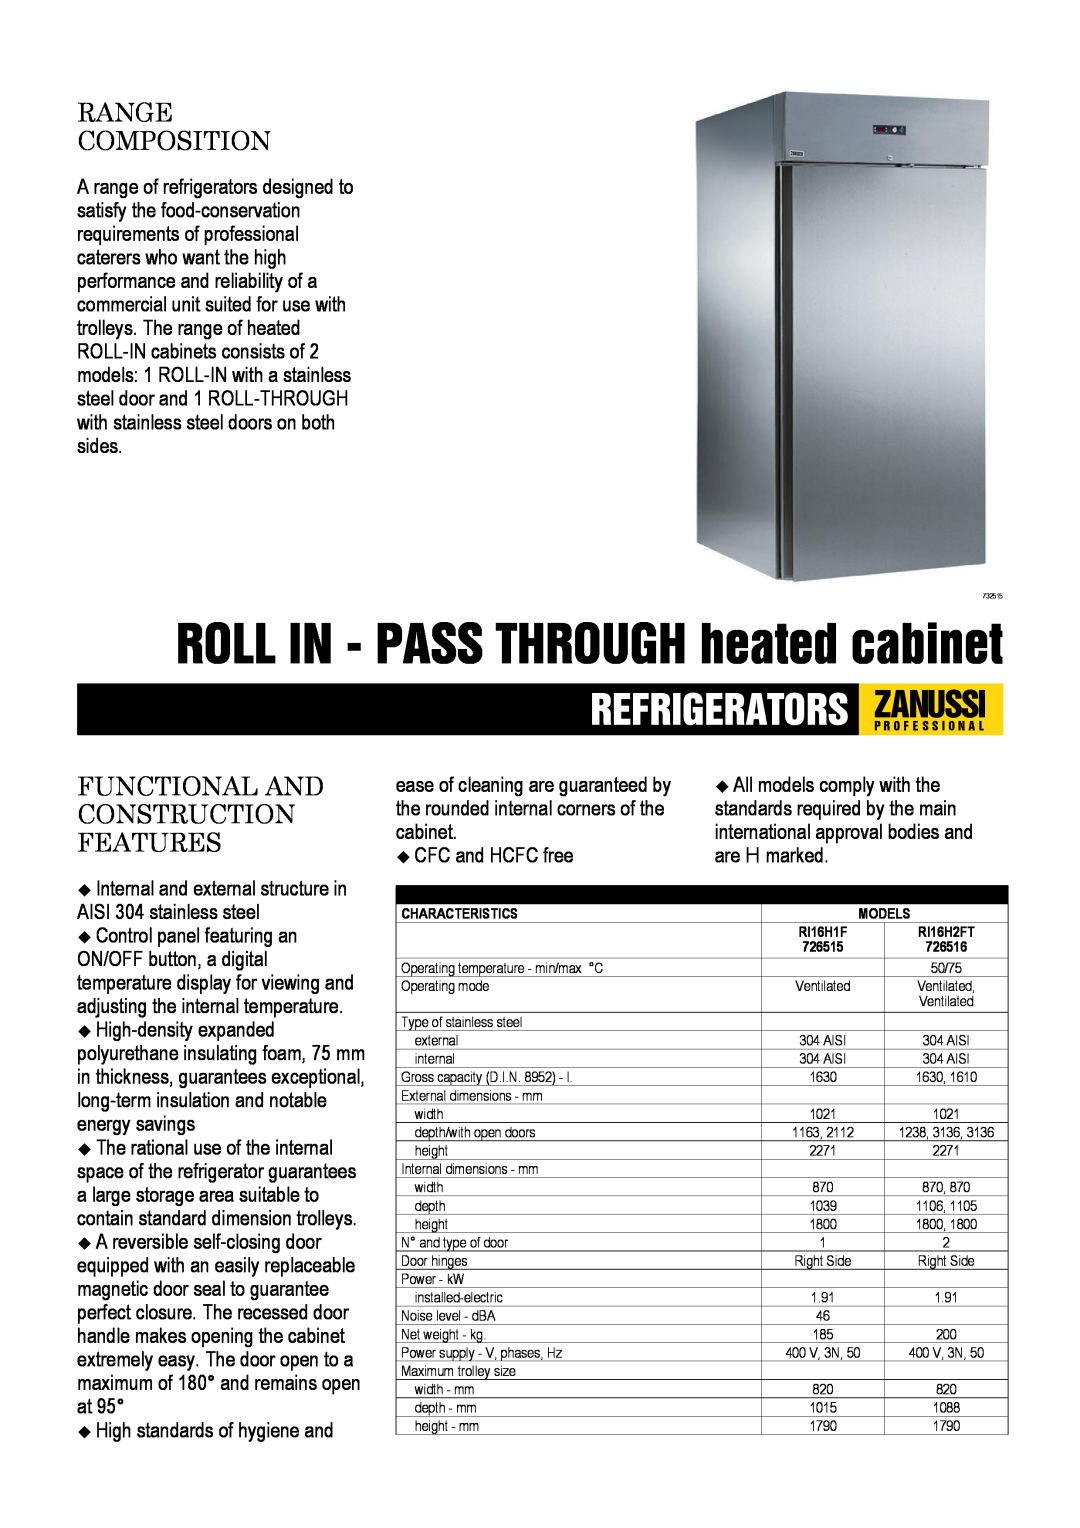 Zanussi 726515 dimensions ROLL IN - PASS THROUGH heated cabinet, Range Composition, Functional And Construction Features 